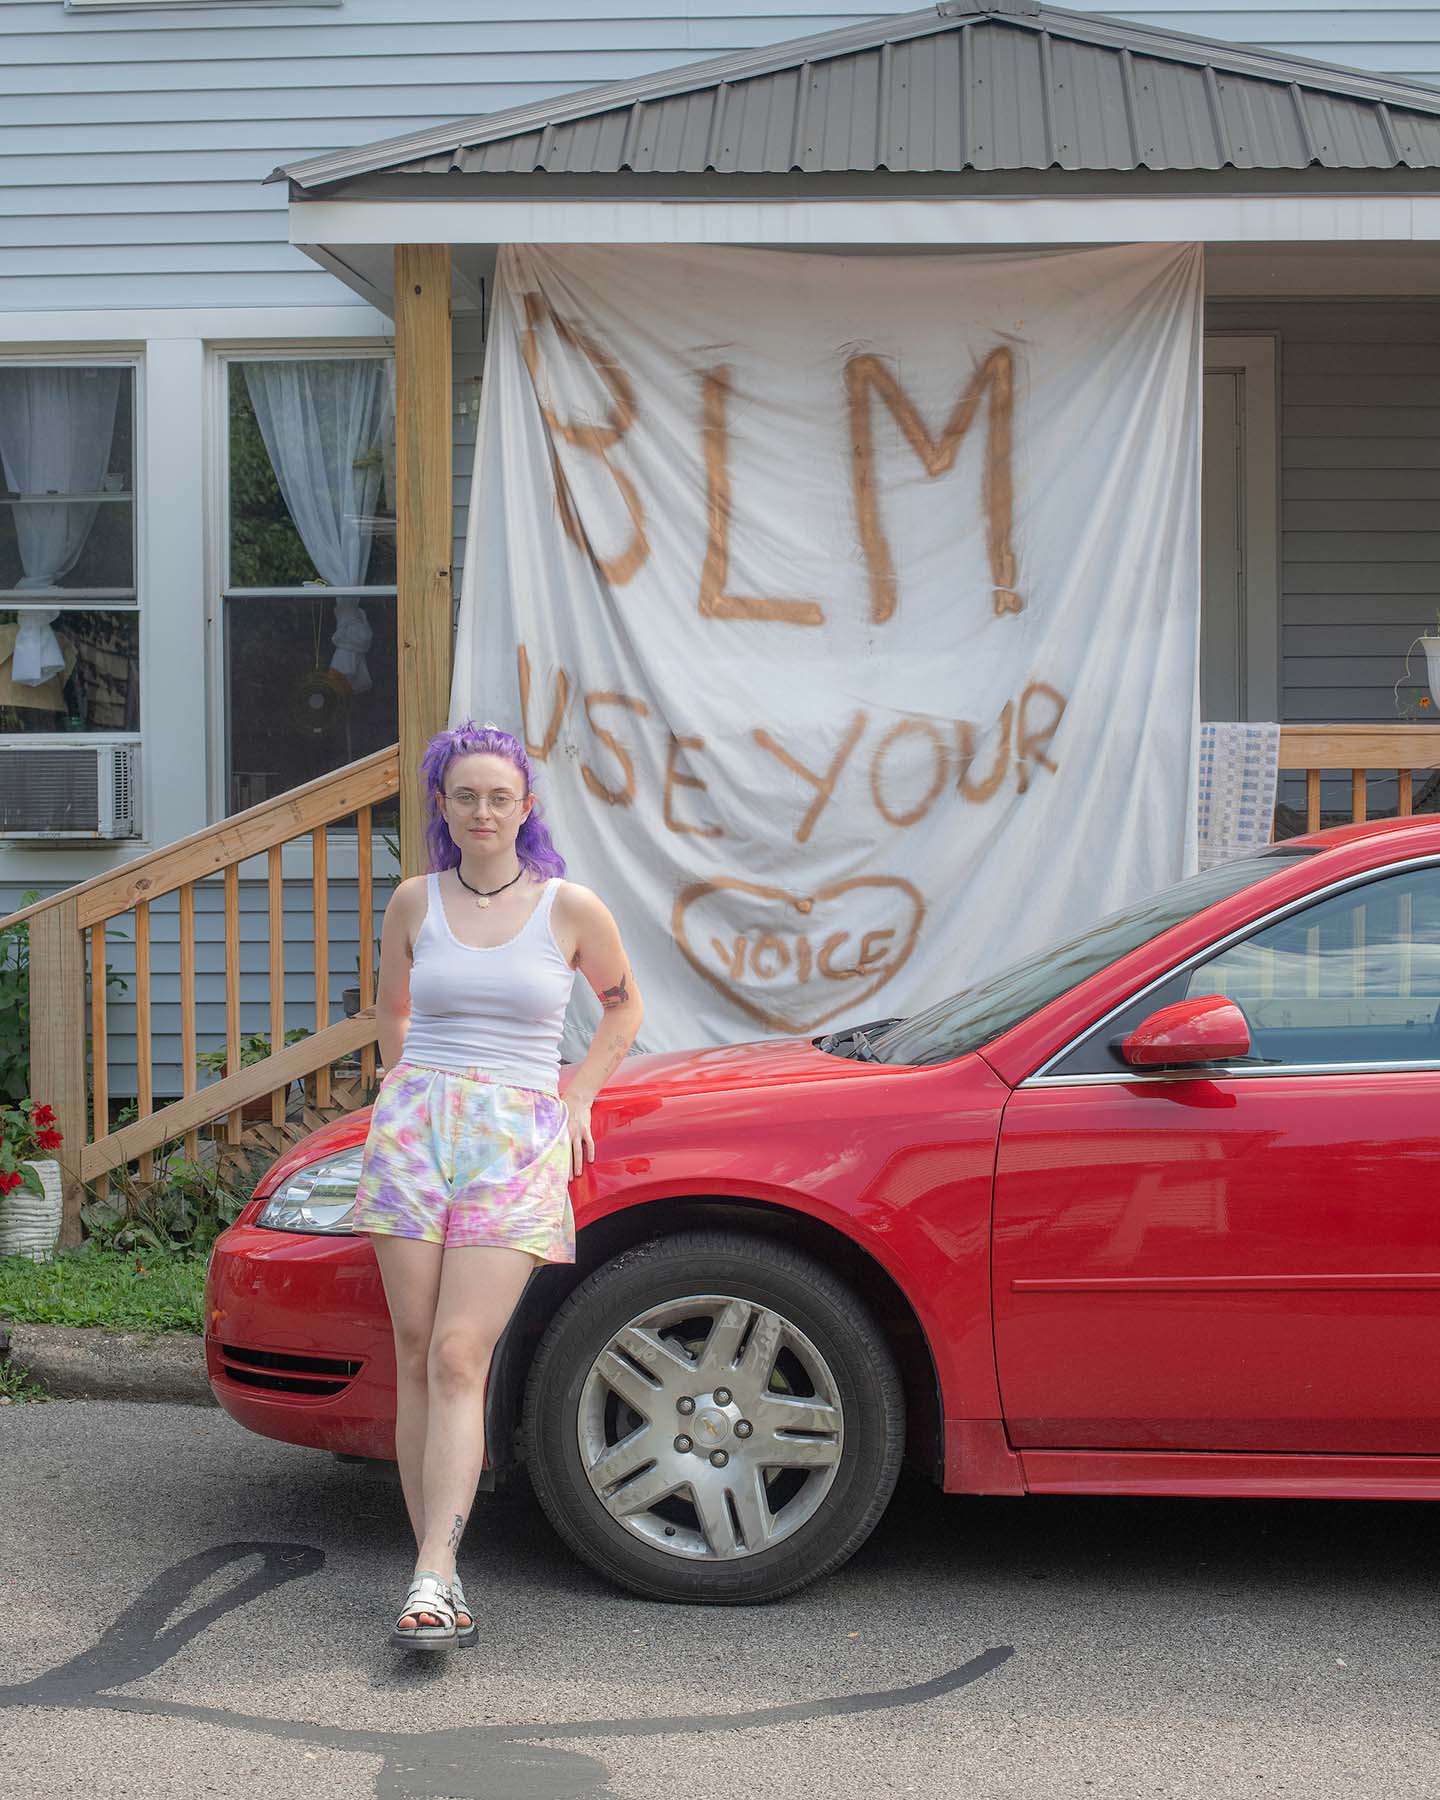 A student poses outside of her off-campus residence and its social justice banner